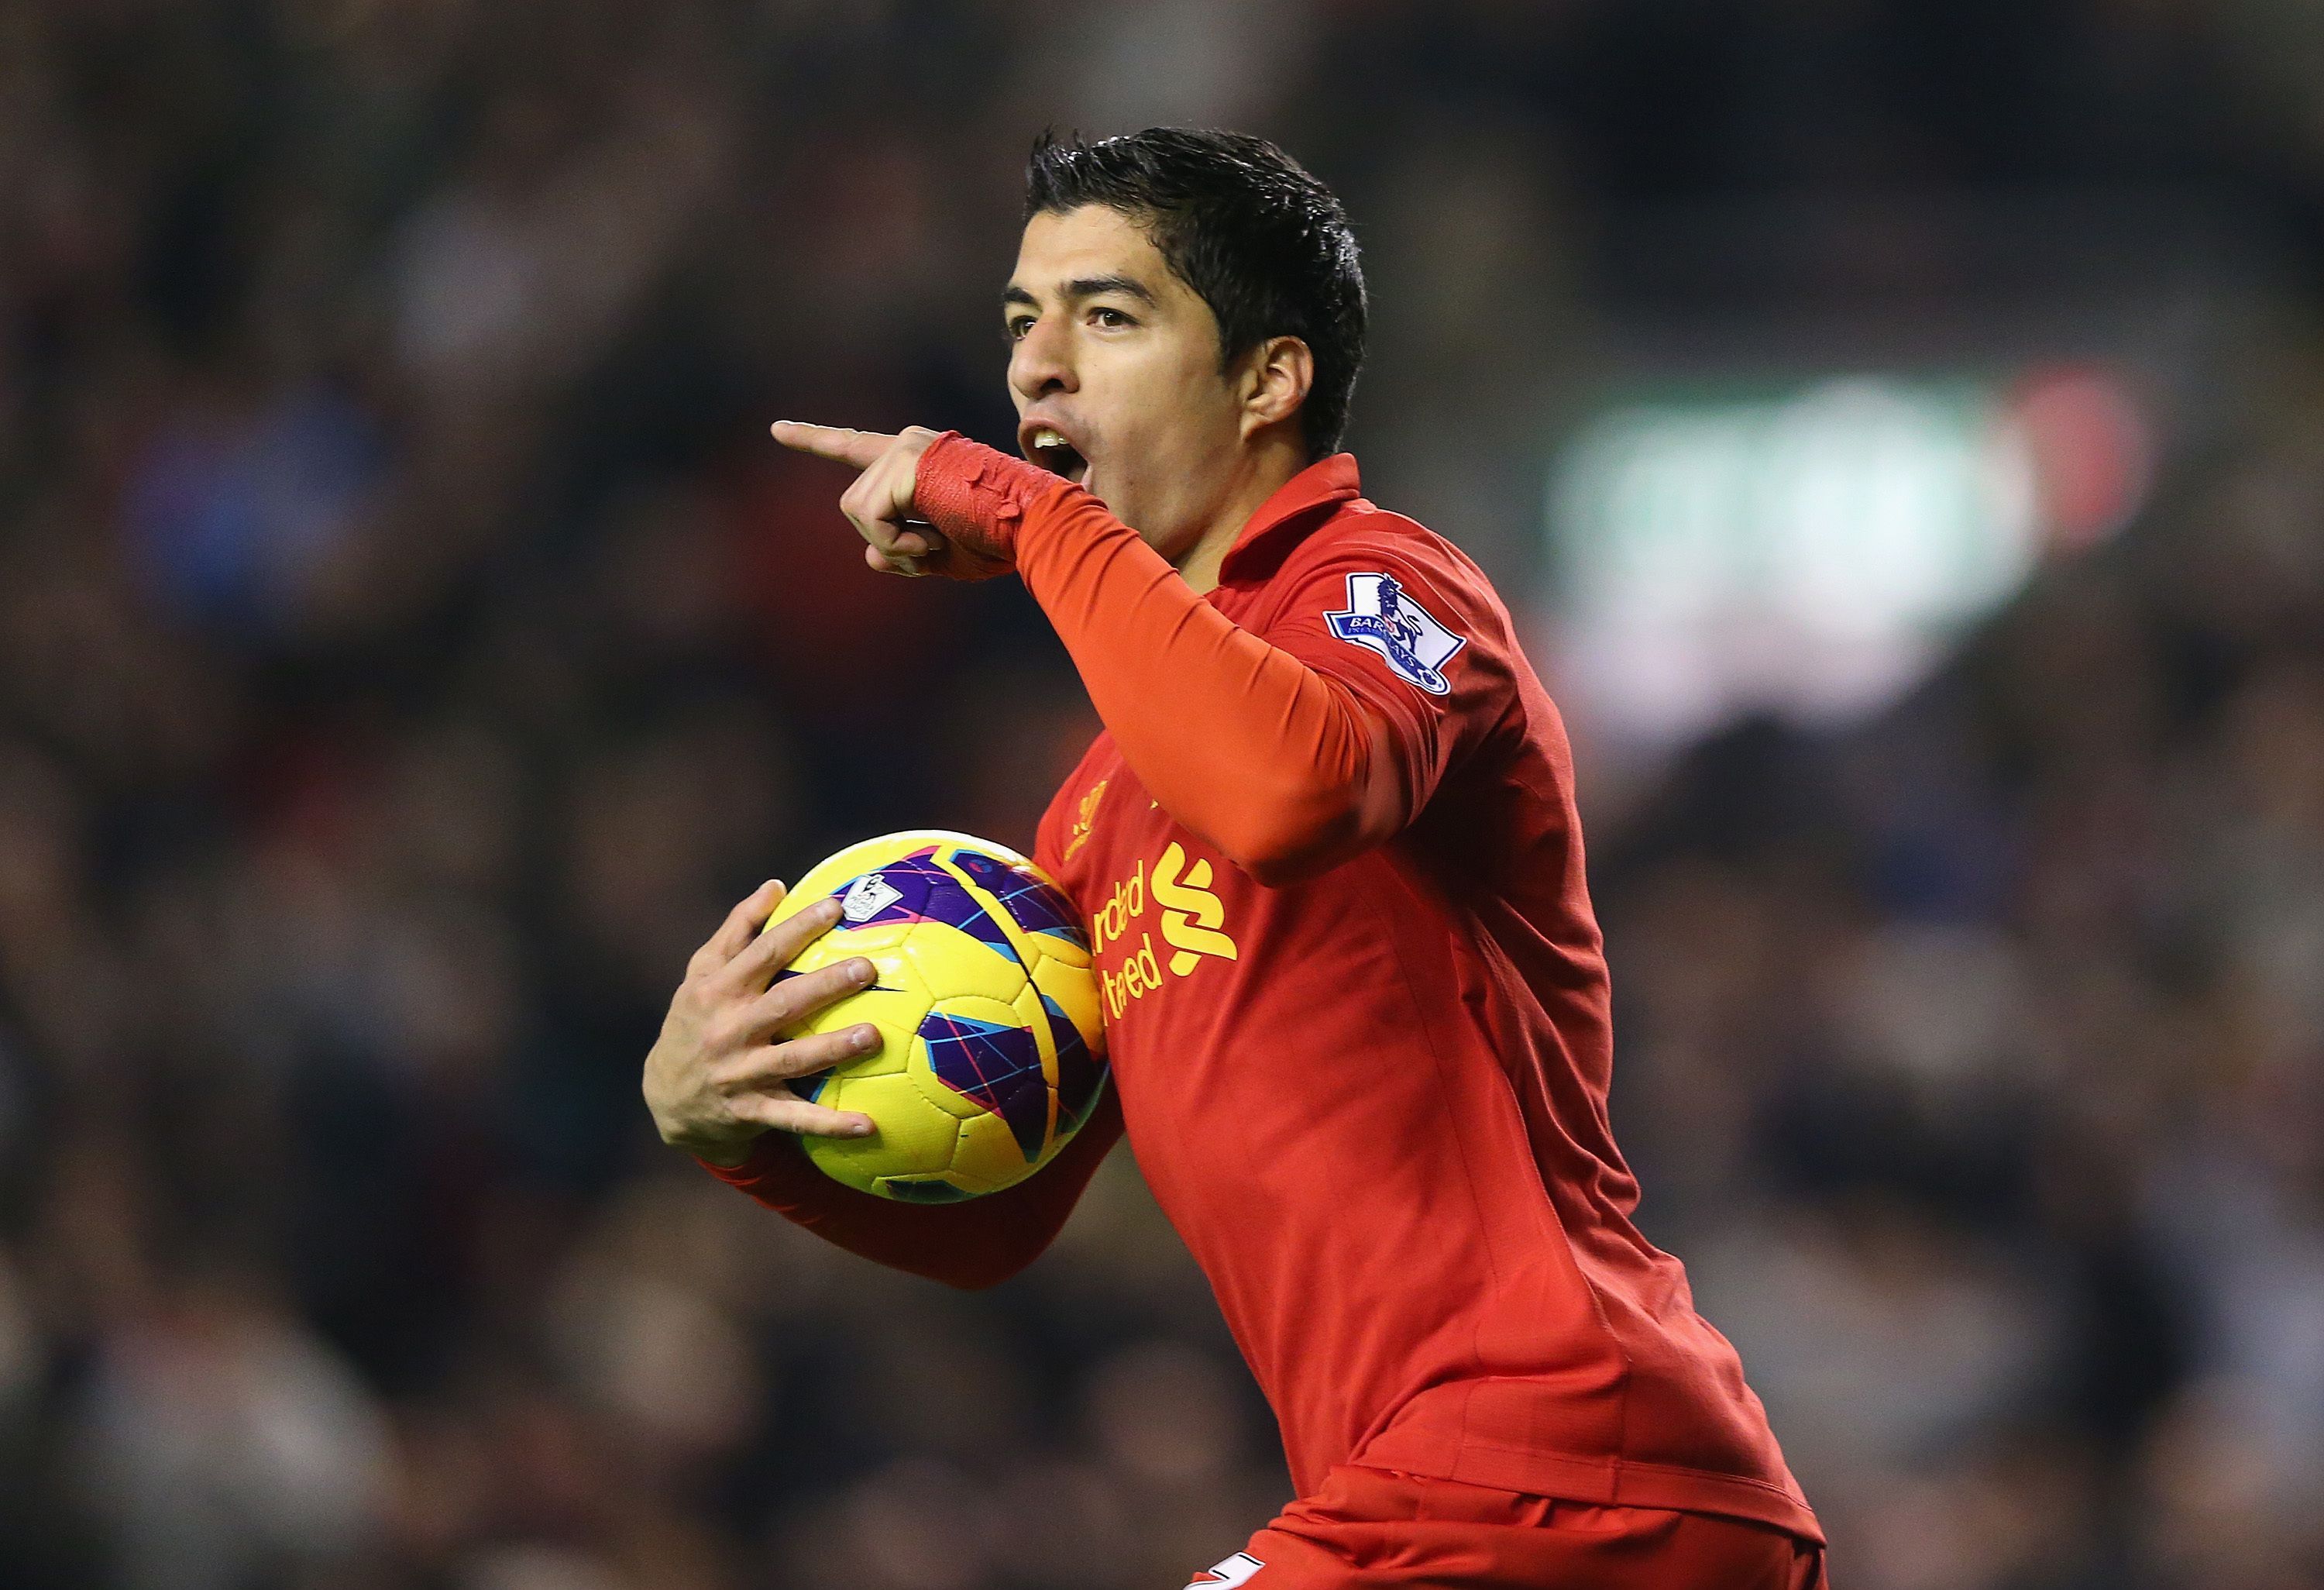 The best forward of Liverpool Luis Suarez wallpapers and images ...